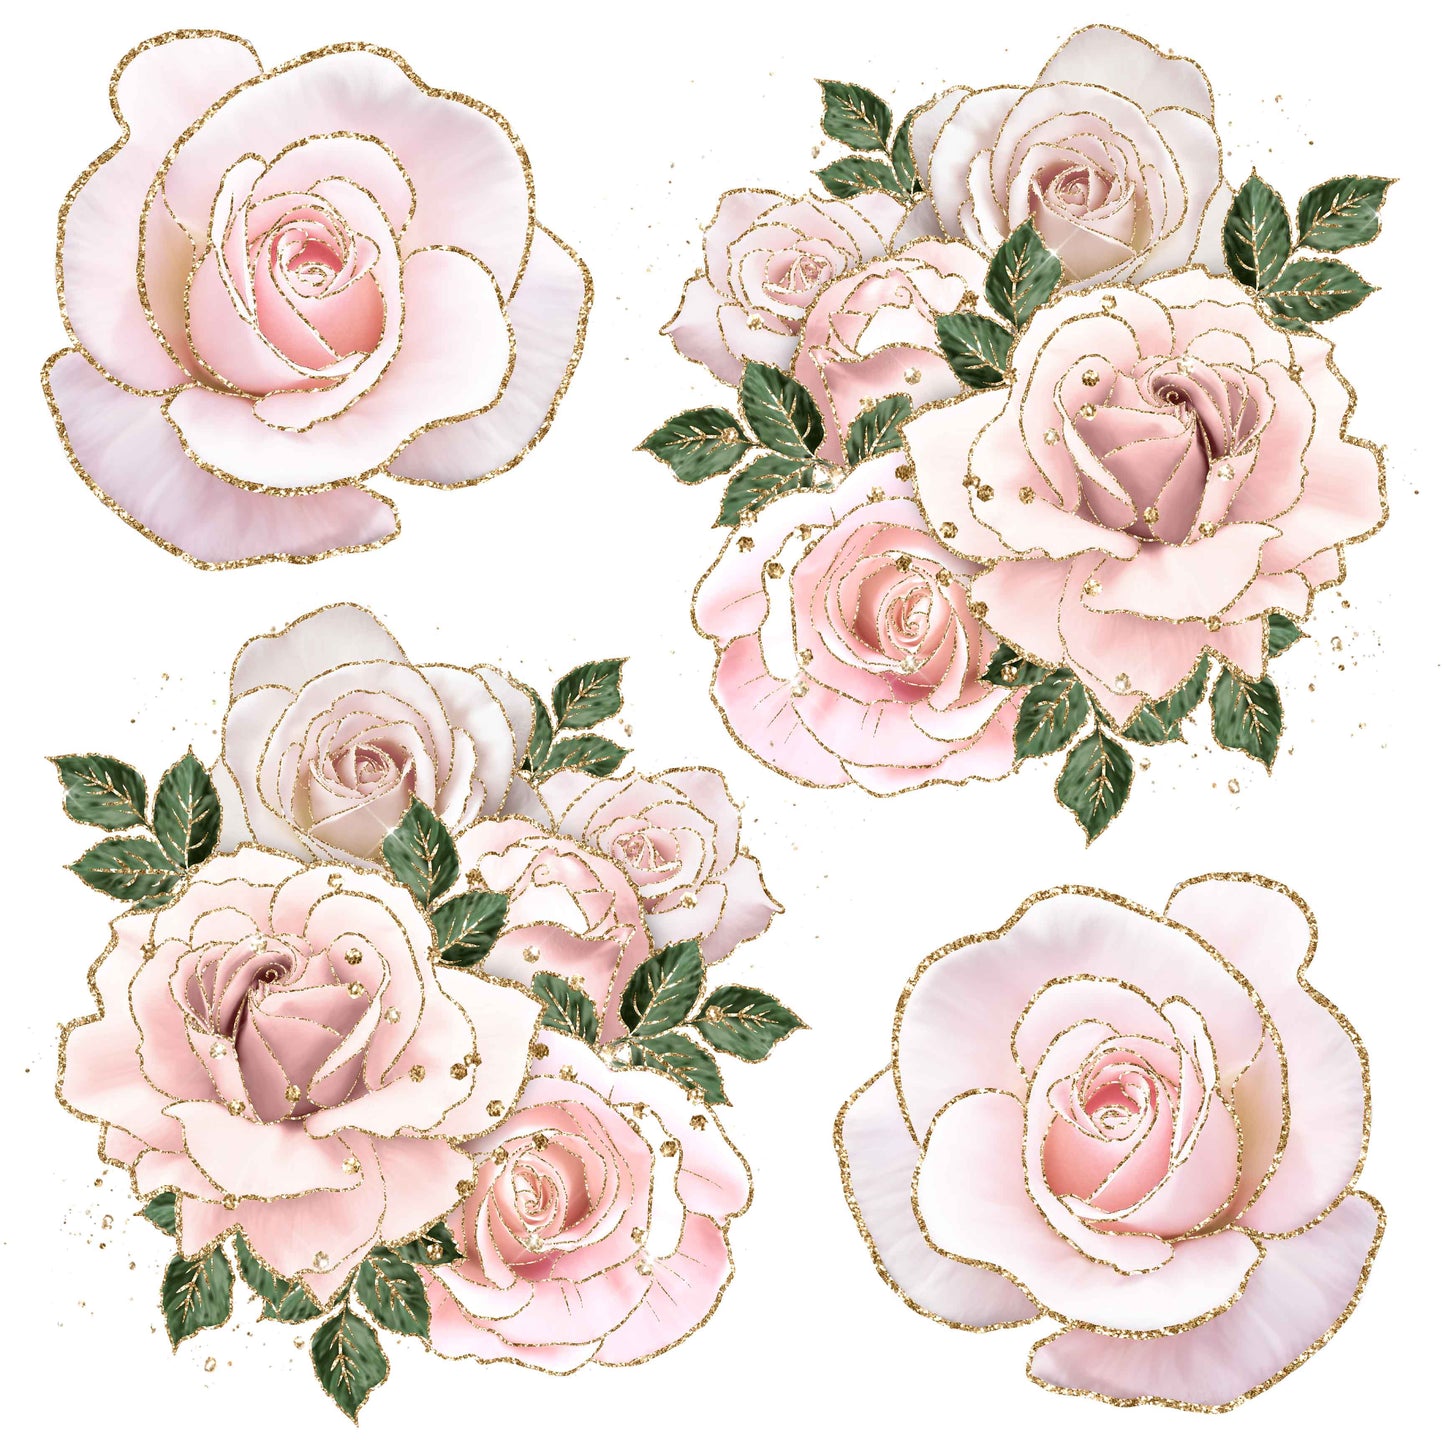 Blush Roses - Flowers Half Sheet Misc. (Must Purchase 2 Half sheets - You Can Mix & Match)